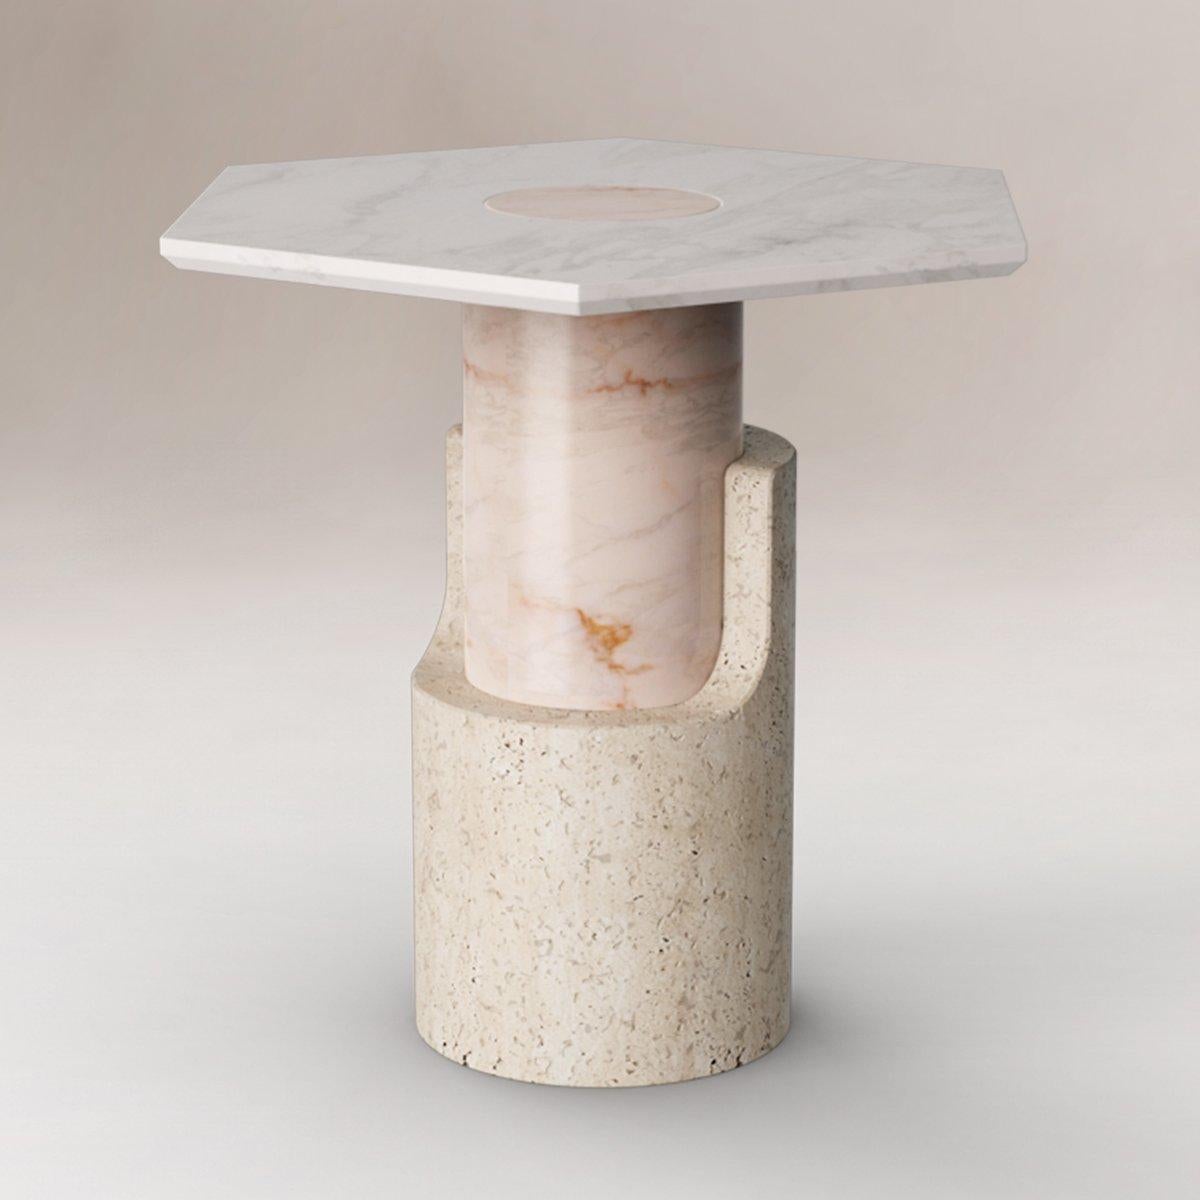 Sculpted contemporary marble side table by Dooq

Dimensions
W 60 x D 60 x H 55 cm

Materials & Finishes
Entirely hand made in marble

Product
The Braque side table is an elegant and slick side table created by Dooq. Braque is entirely hand